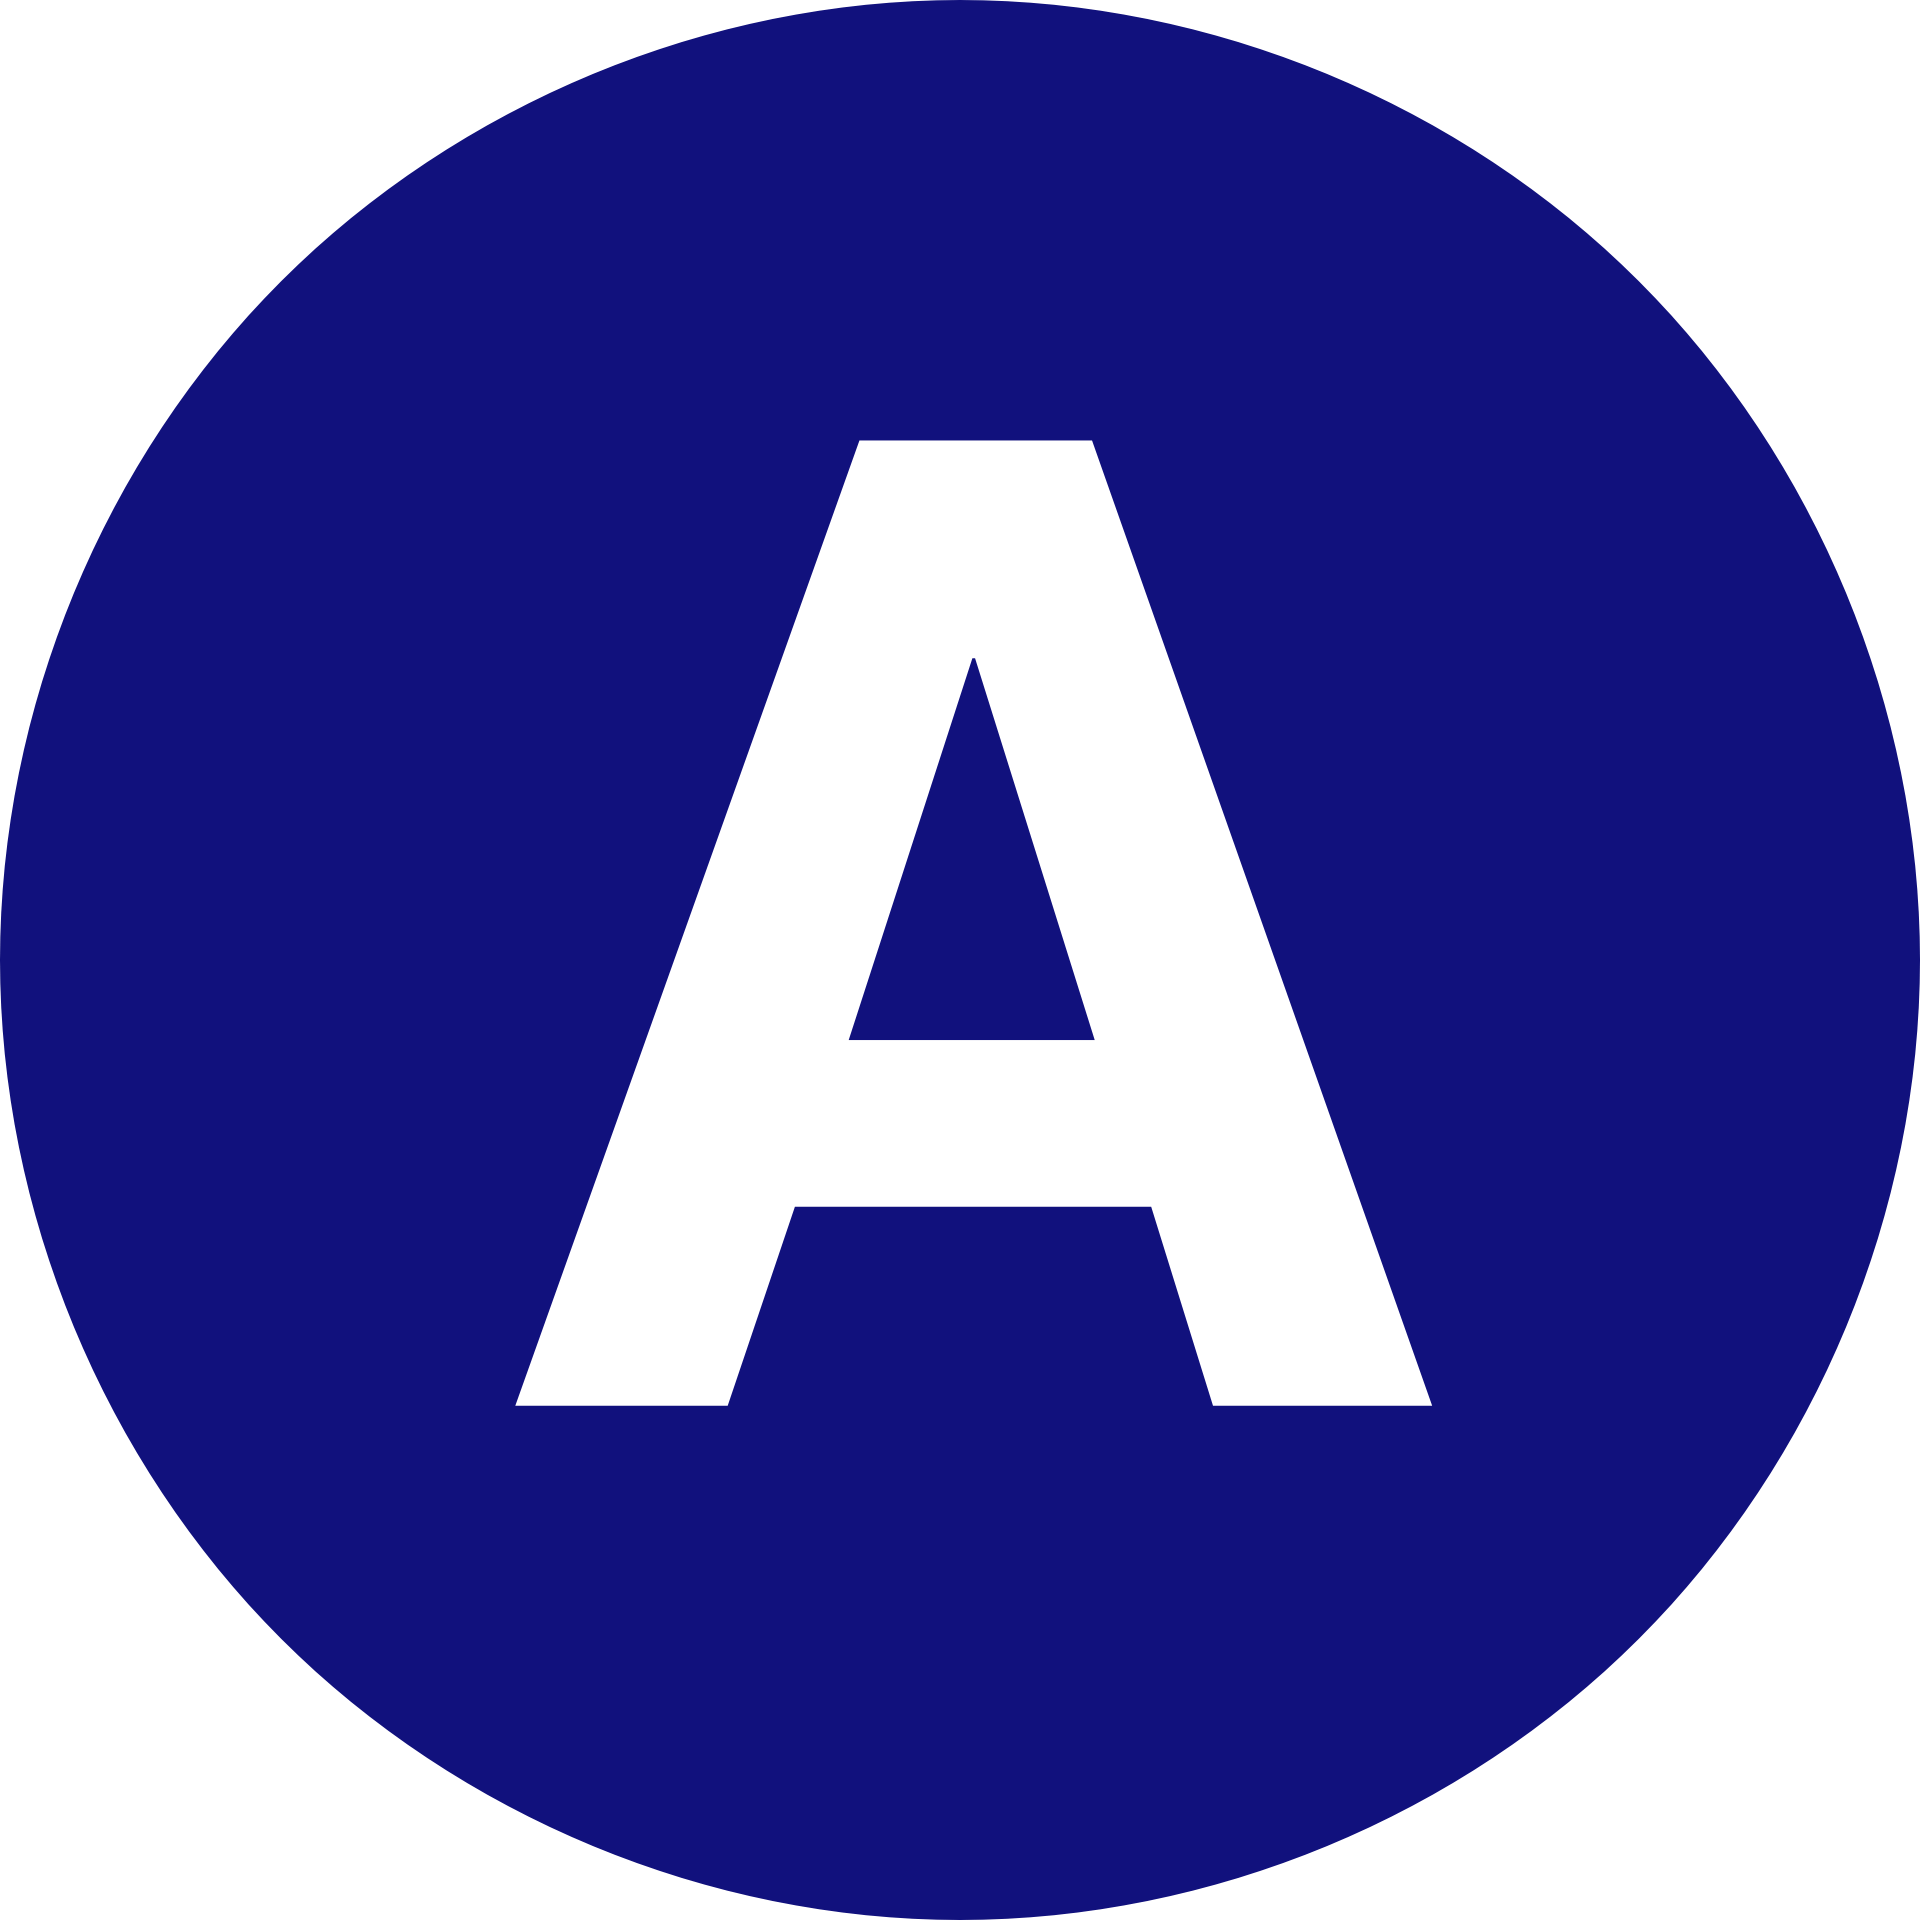 Blue in Circle Logo - letter a in a circle - Hobit.fullring.co